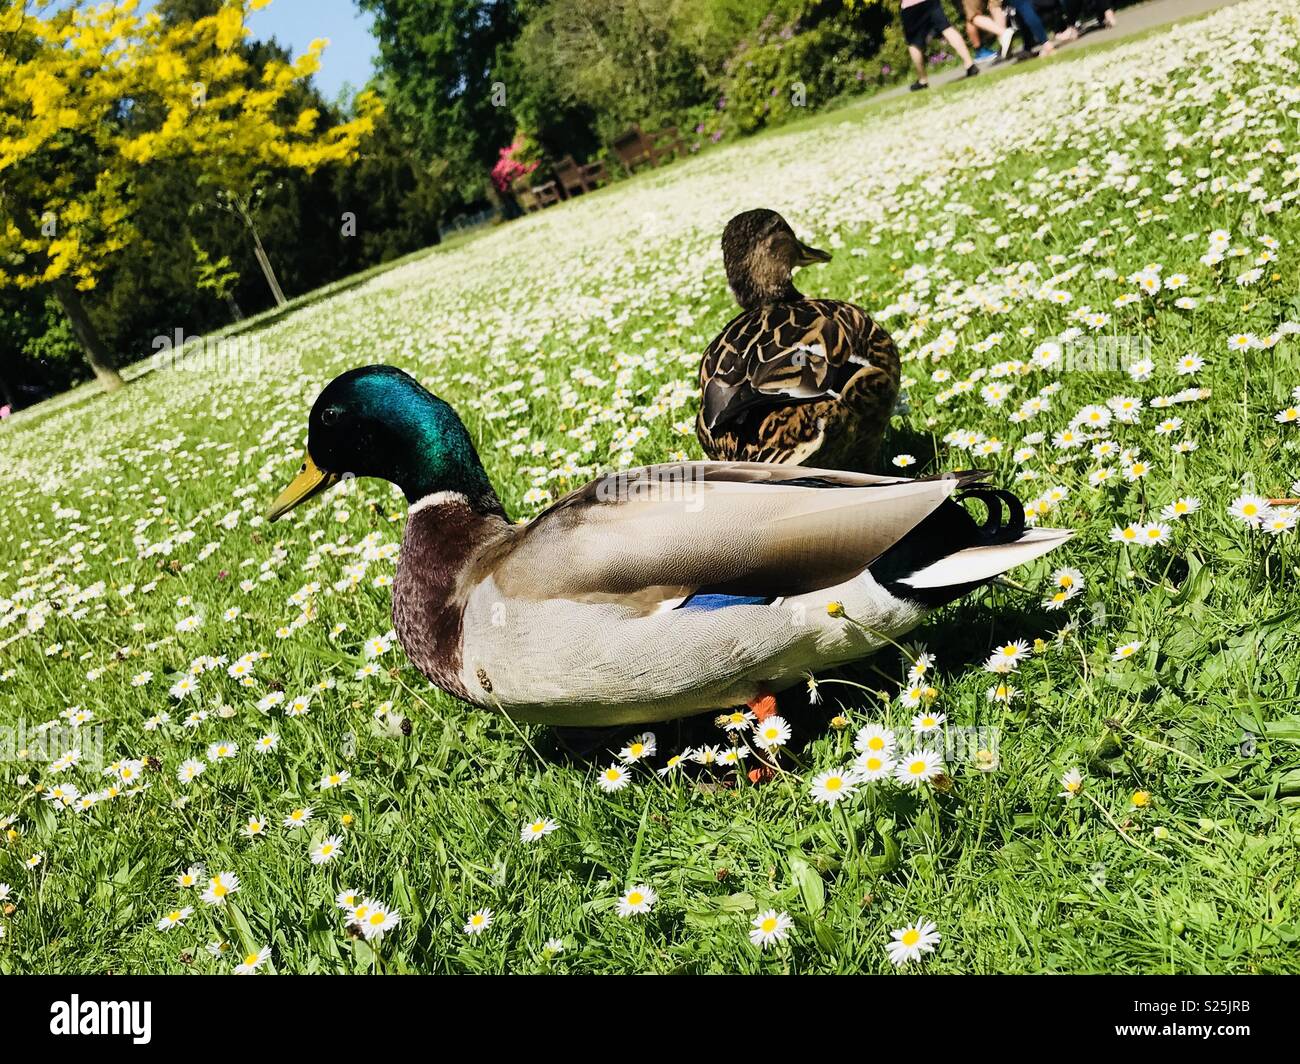 Two ducks walking on the grass surrounded by Daisy’s Stock Photo